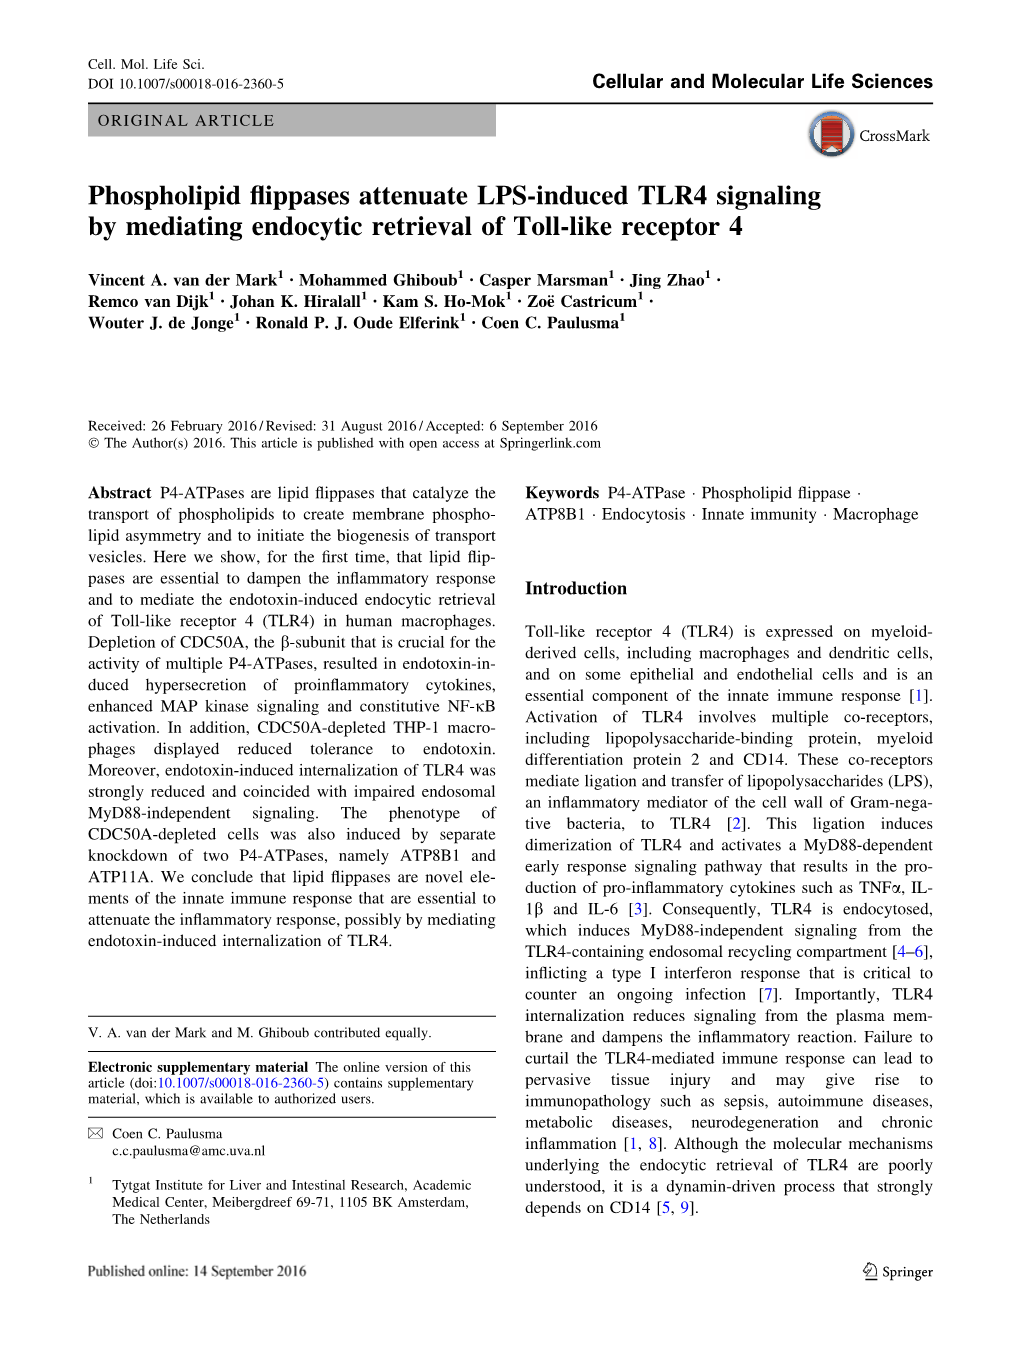 Phospholipid Flippases Attenuate LPS-Induced TLR4 Signaling By